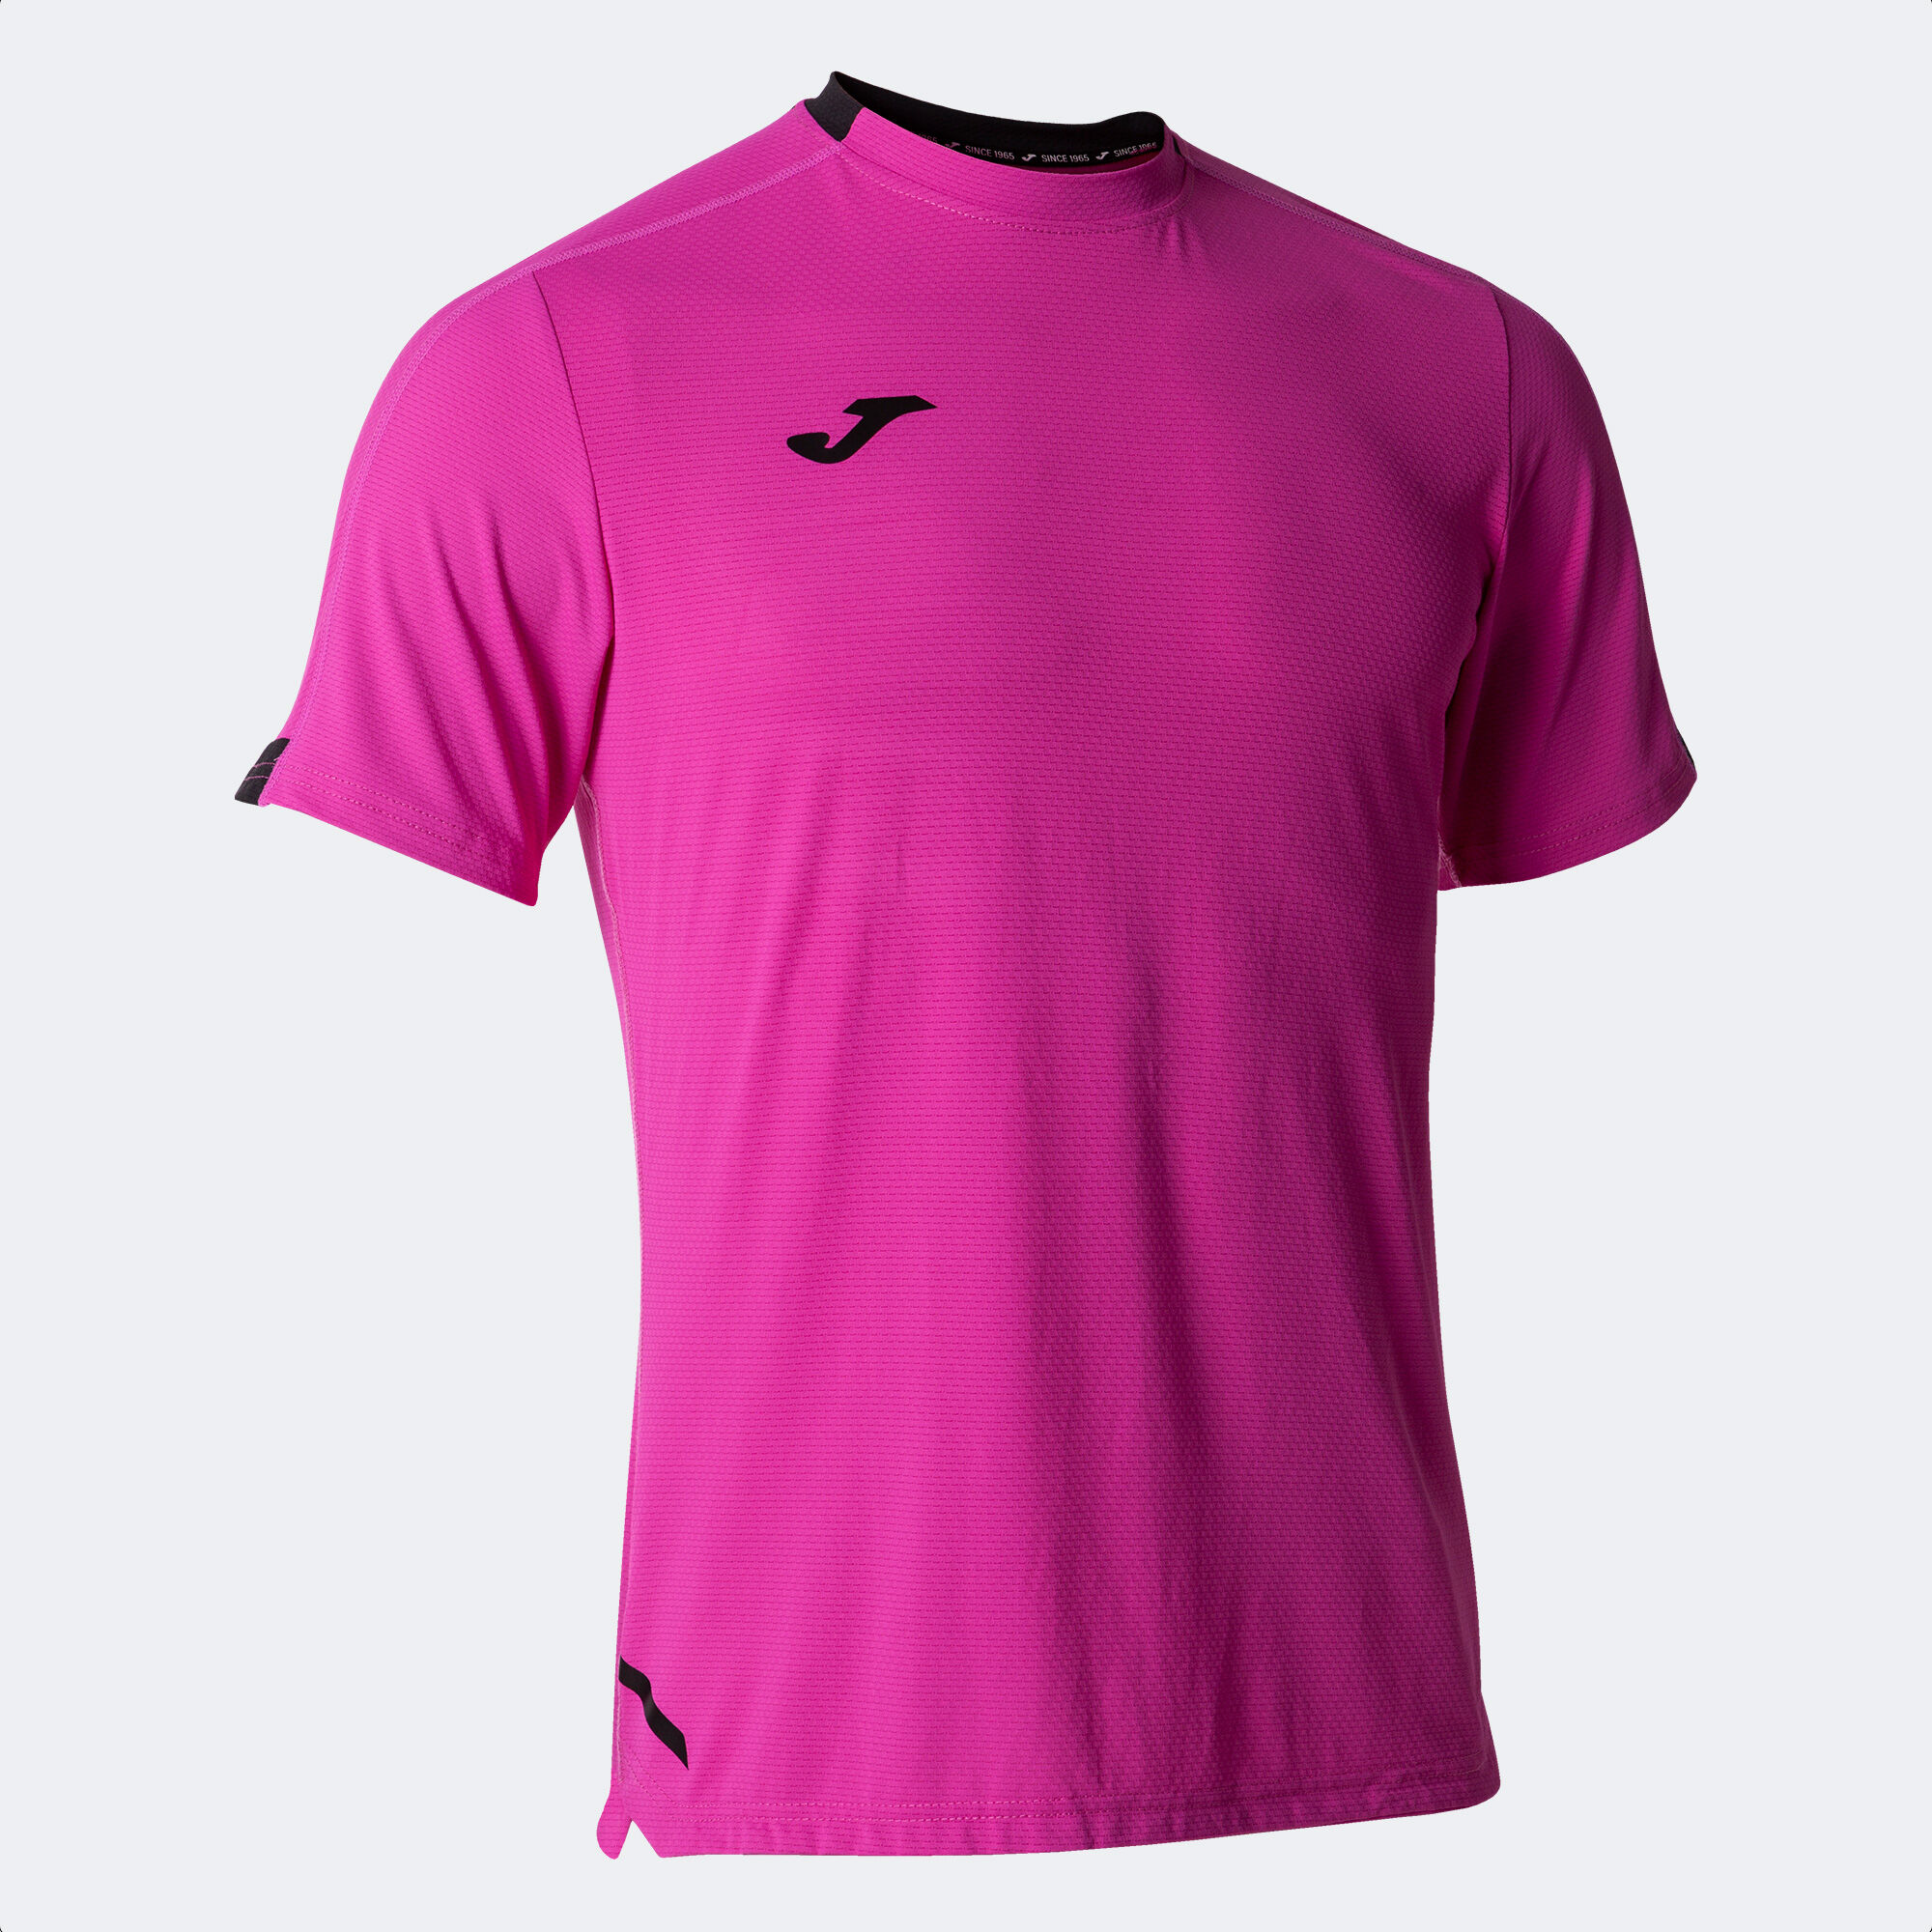 MAILLOT MANCHES COURTES HOMME SMASH ROSE FLUO